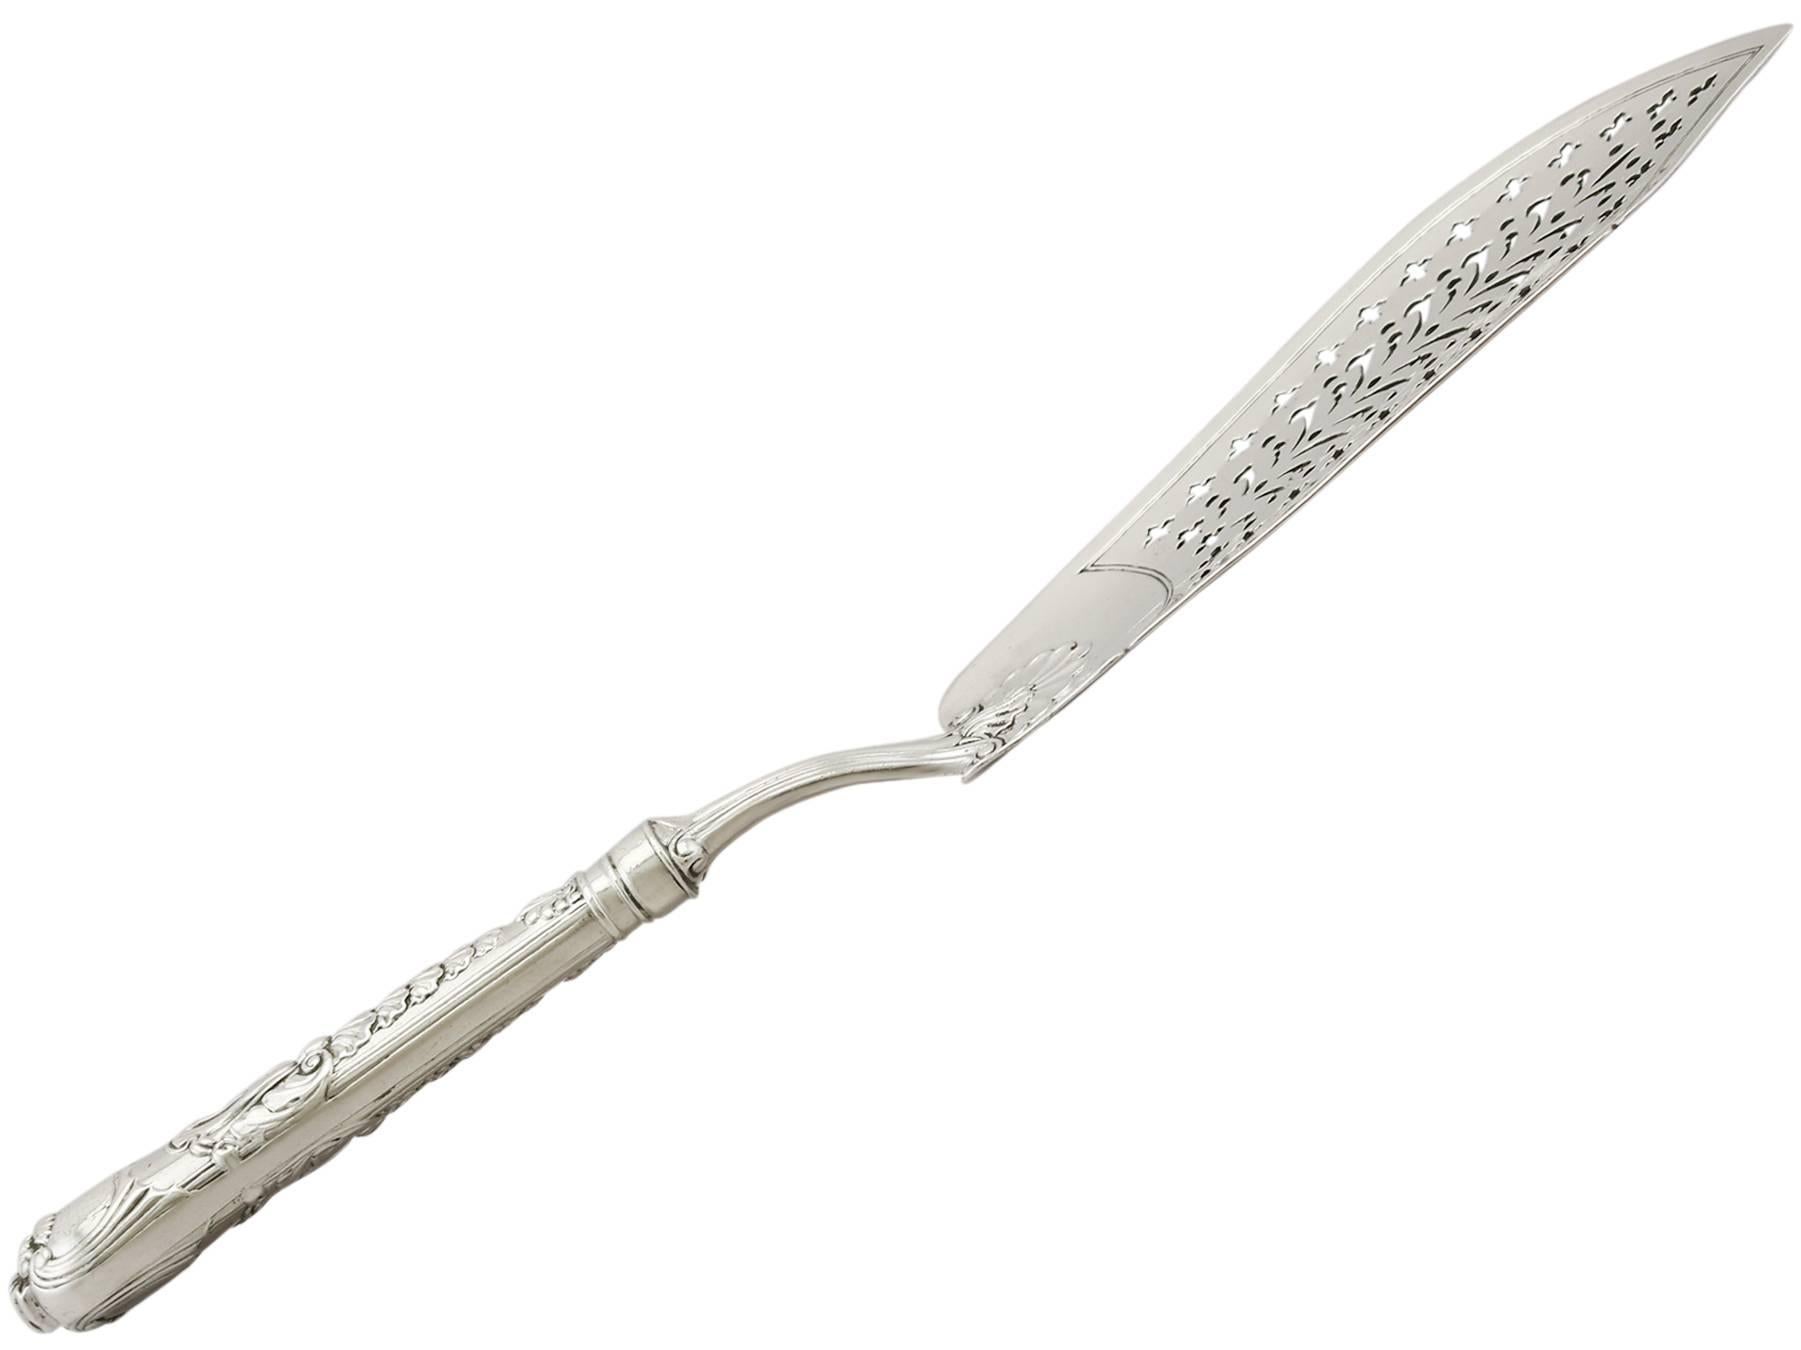 An exceptional, fine and impressive, rare antique Georgian English sterling silver fish slice / server made by Paul Storr; an addition to our silver flatware collection.

This exceptional antique George III sterling silver fish slice / server has